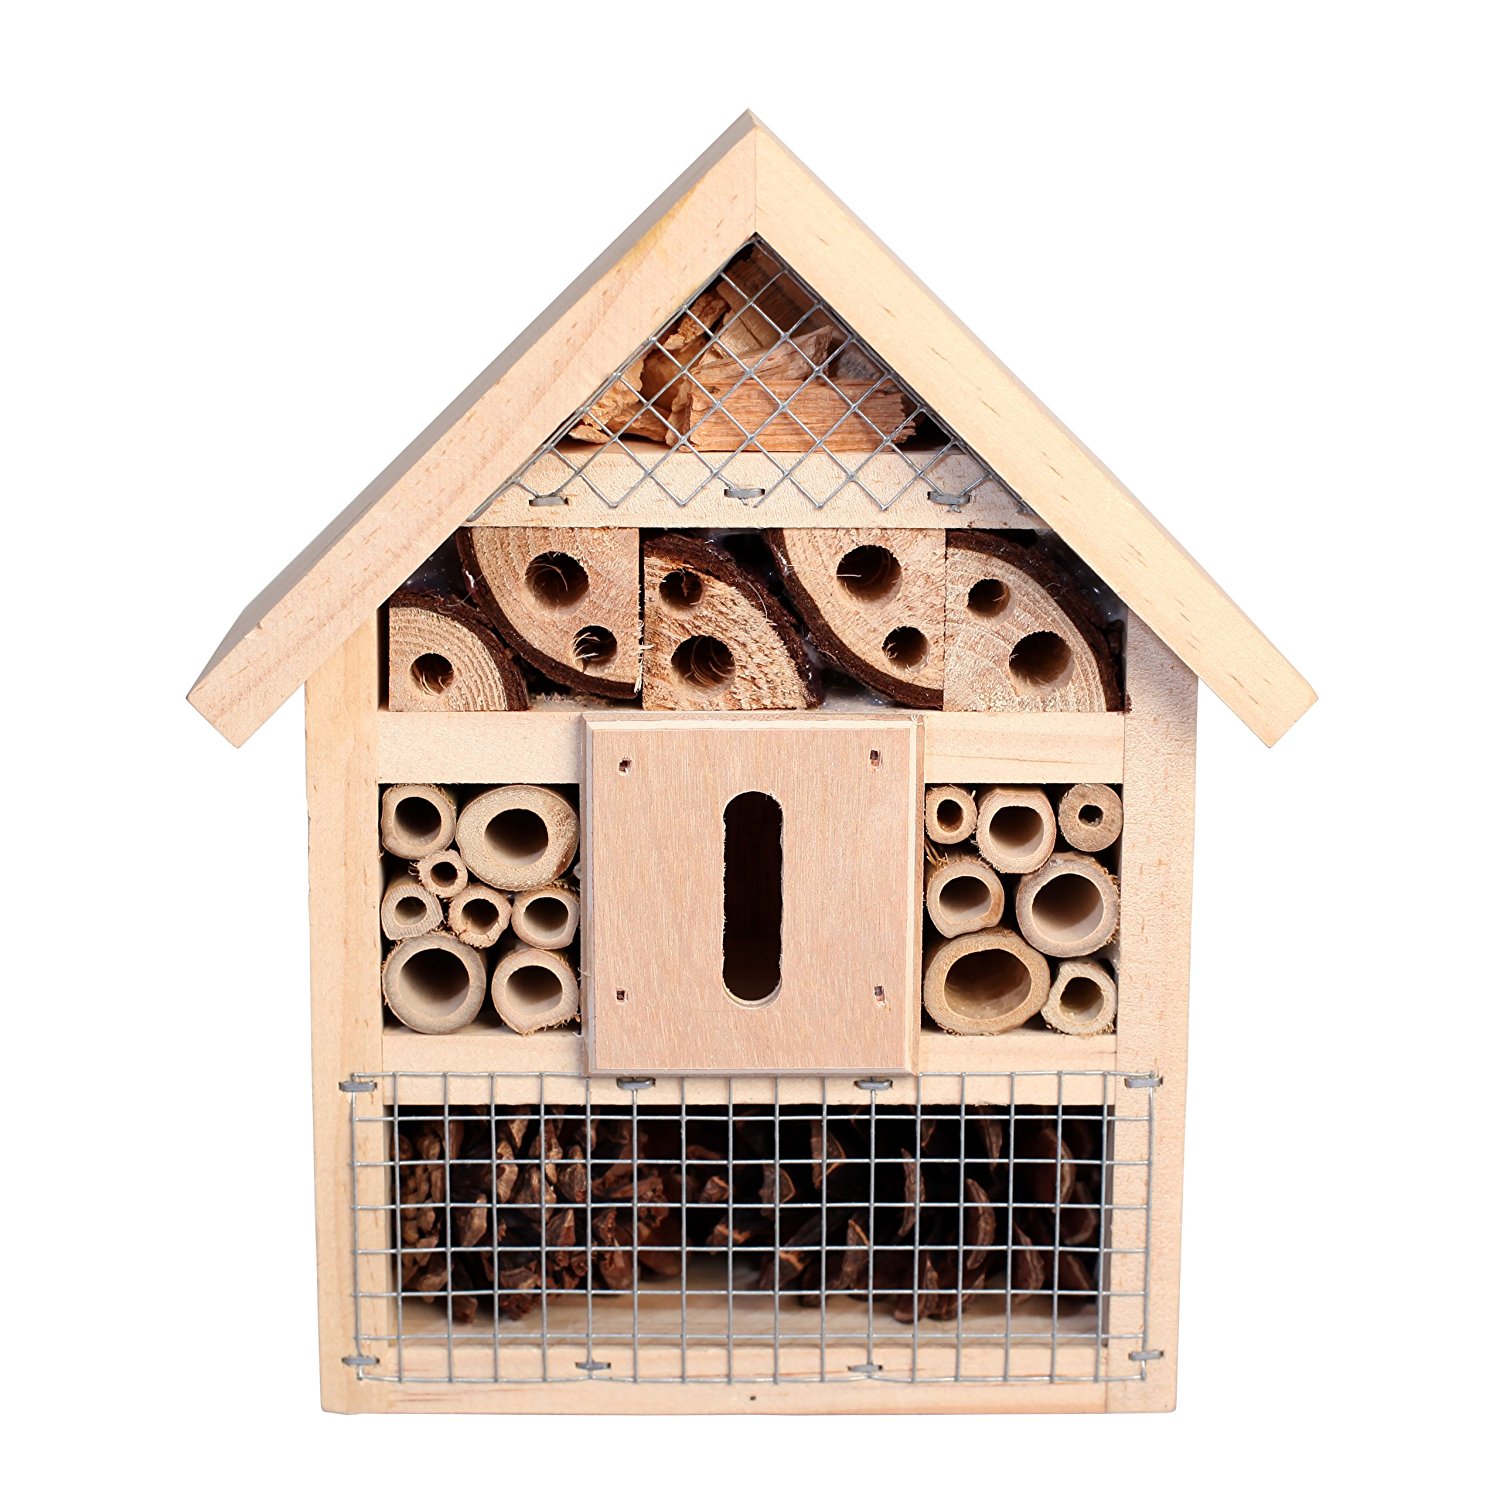 Gardenon Natural Insect Hotel Bee Bug House Hotel: Amazon.co.uk: Pet ...